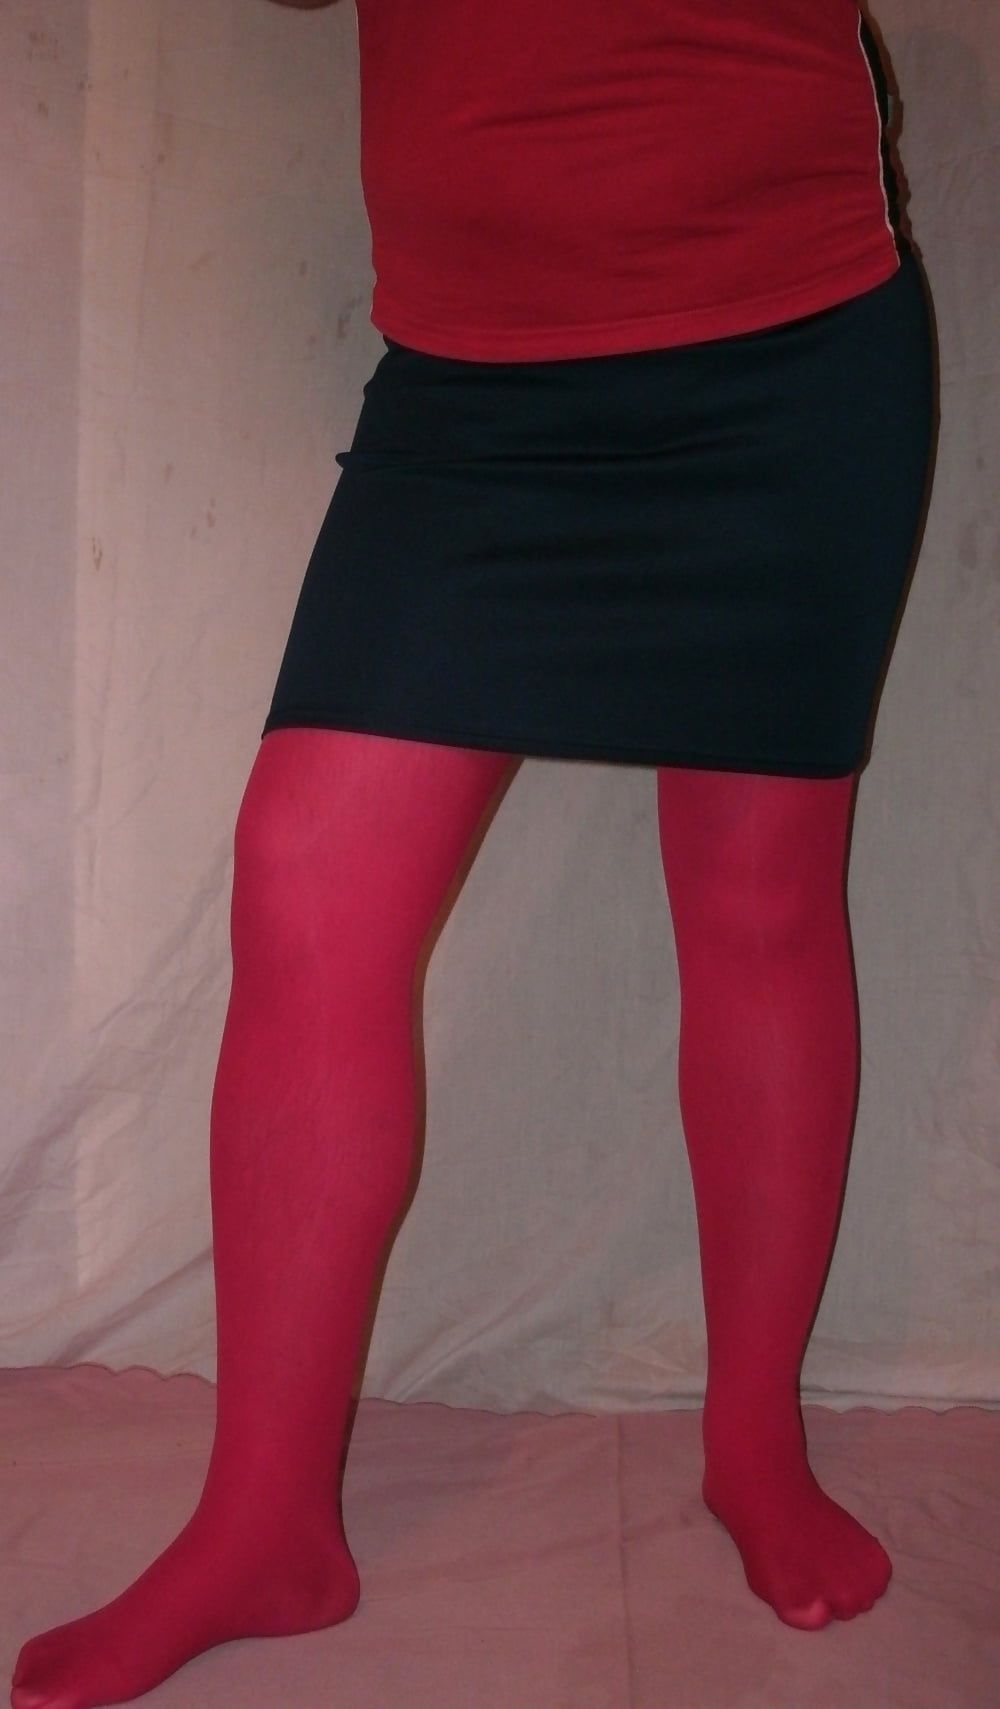 Red stockings #3